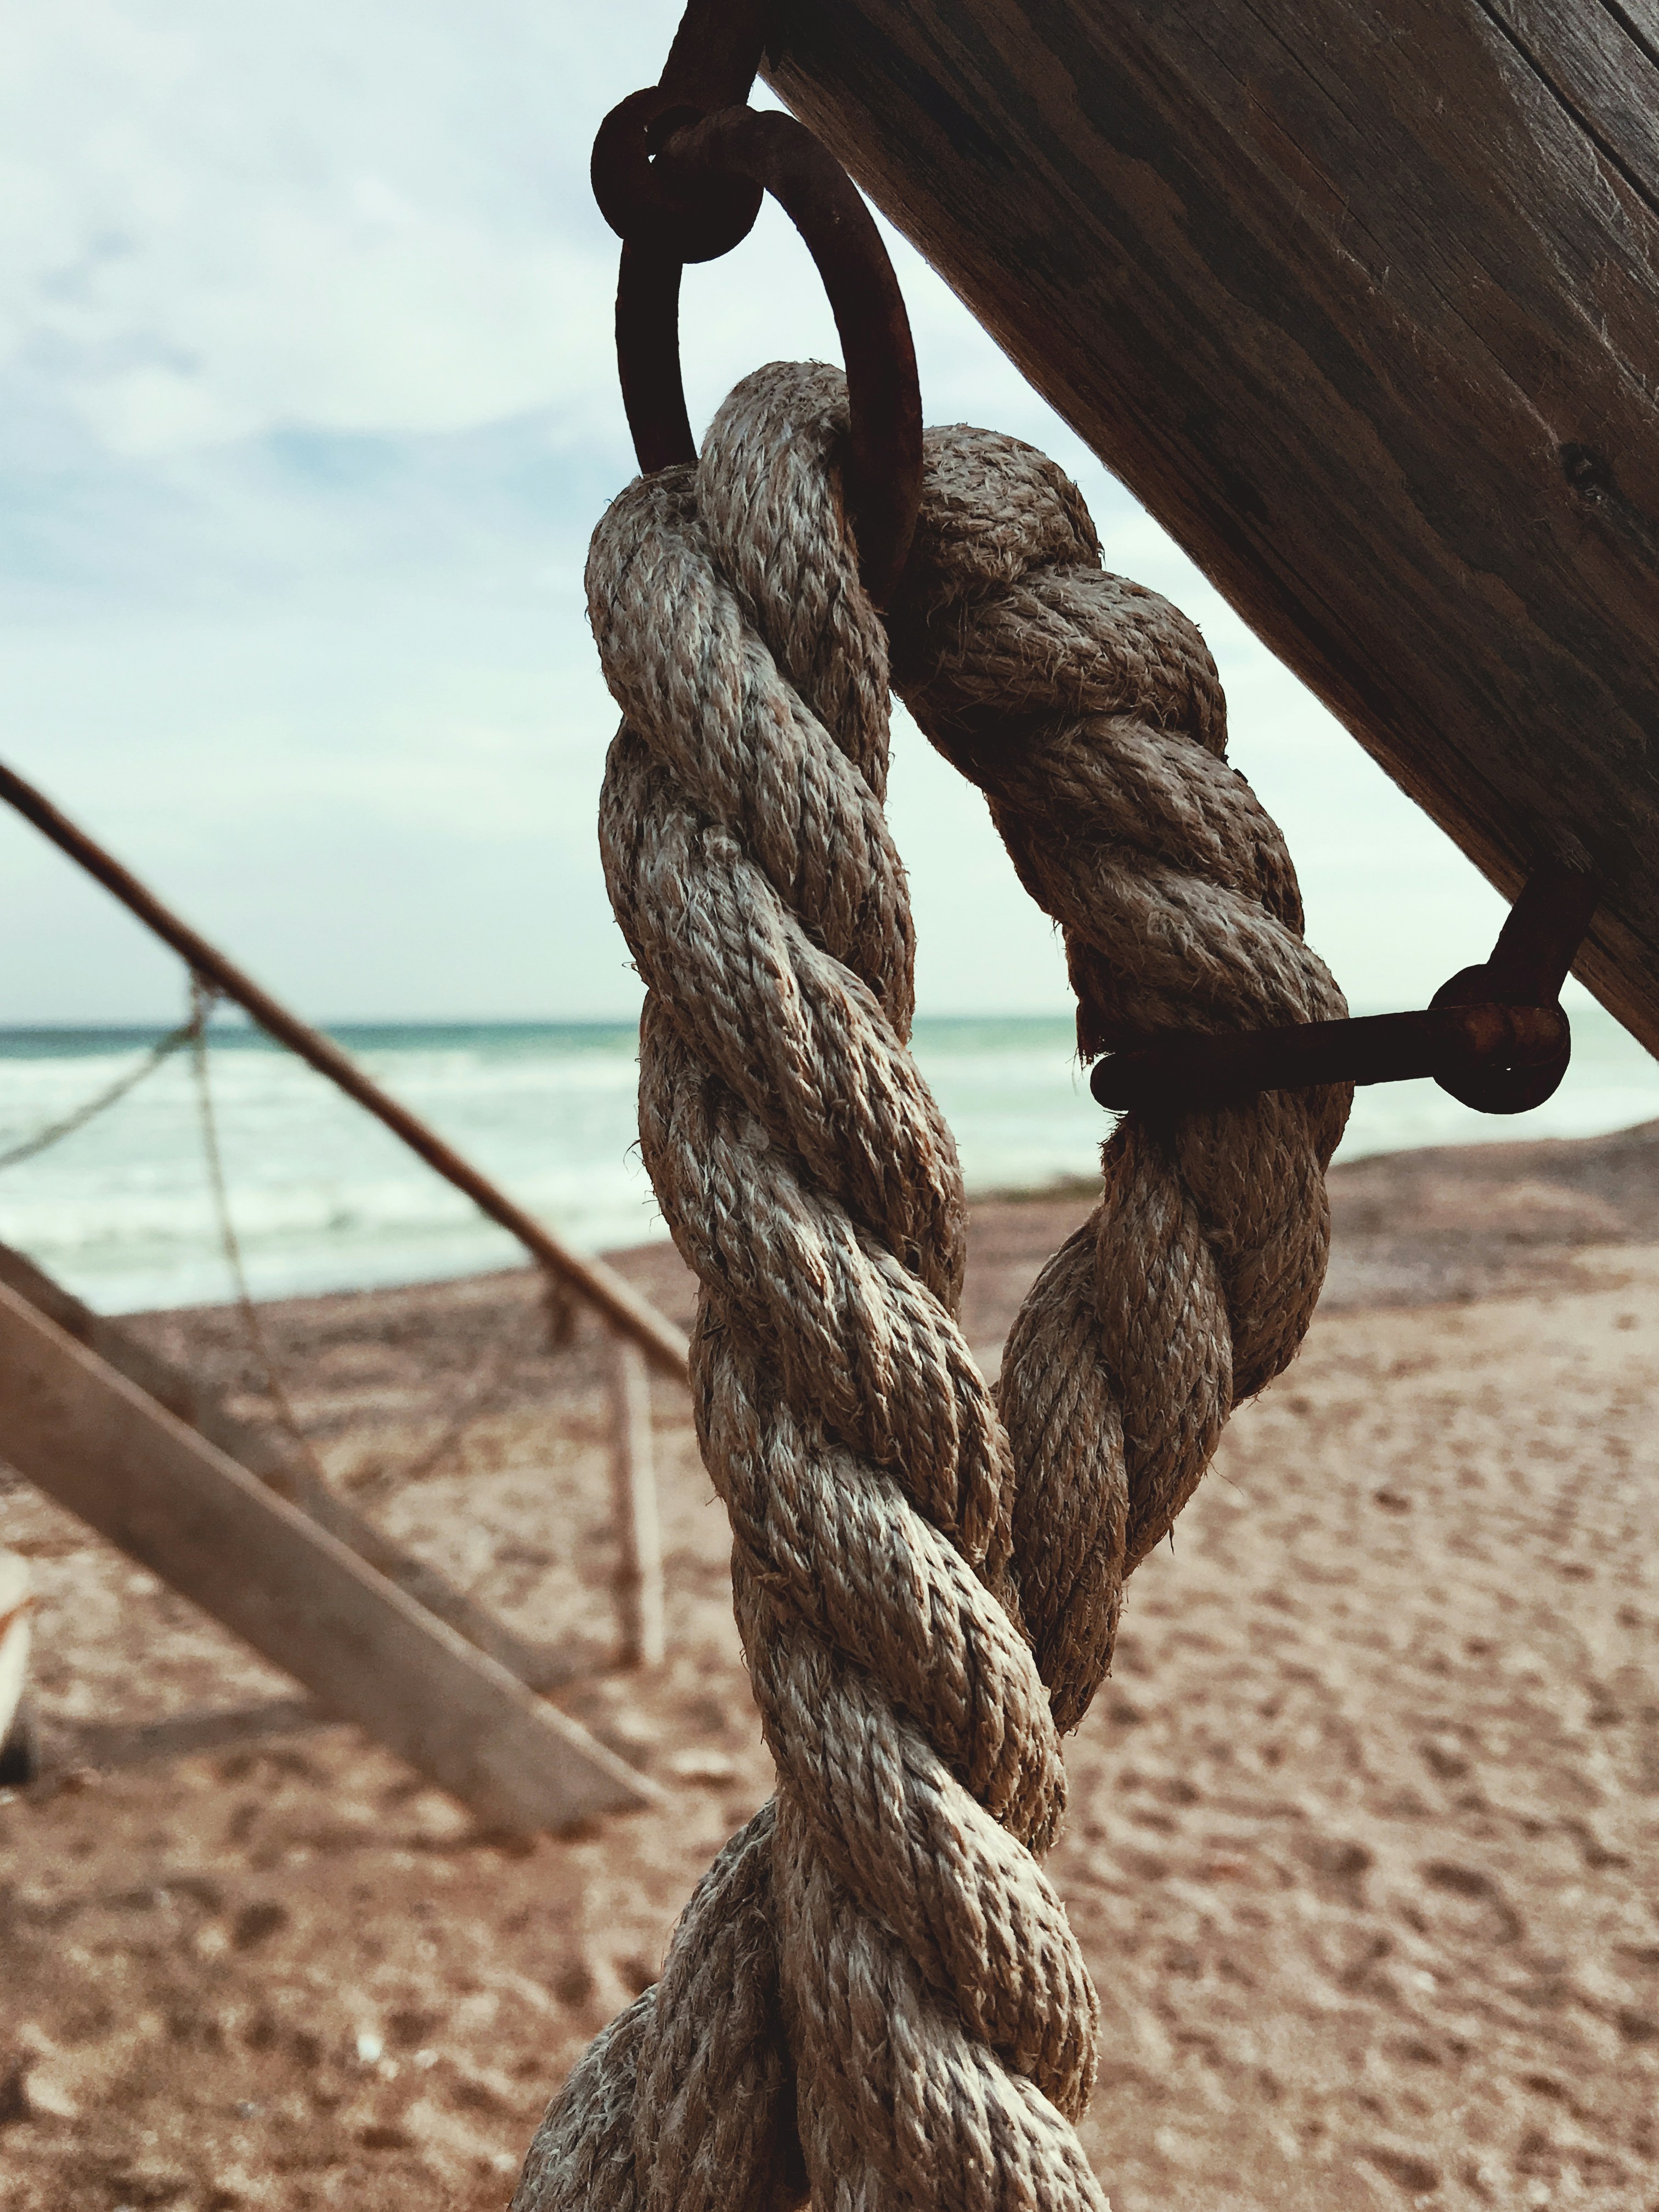 Rope hanging from a wooden pole on the beach